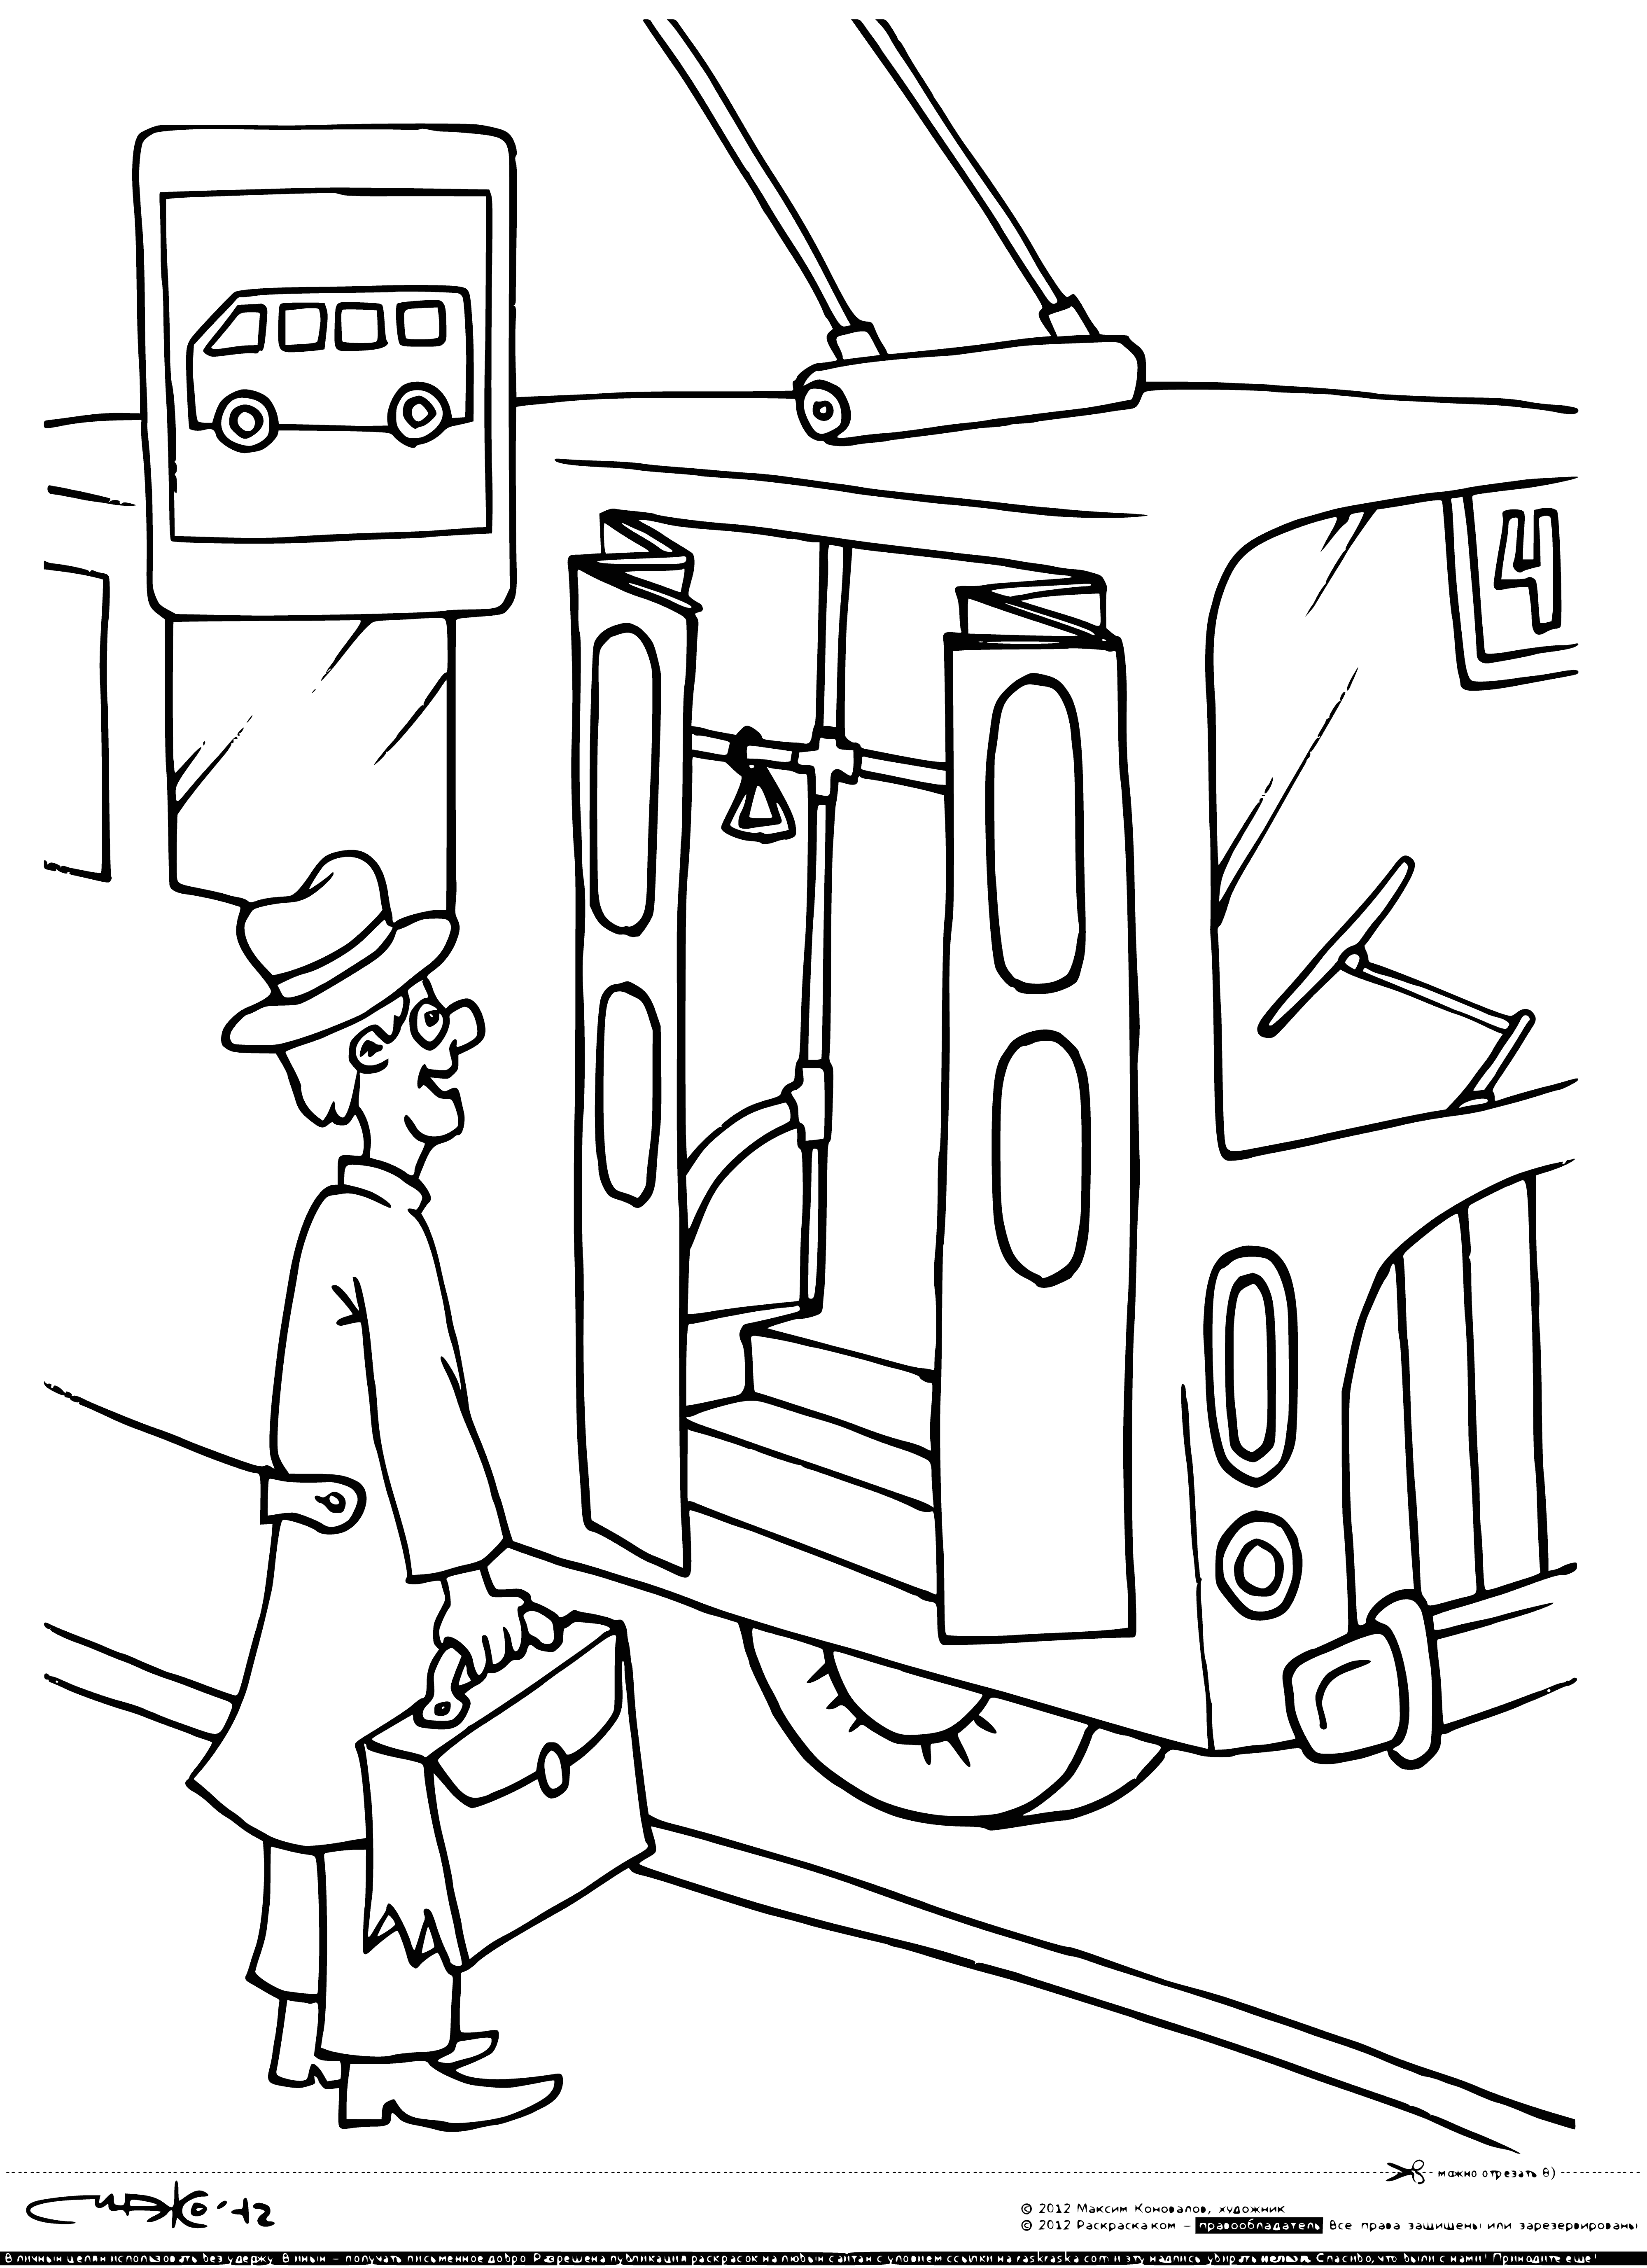 coloring page: Sign = black background, white bus icon/words "BUS STOP", white arrow pointing right.